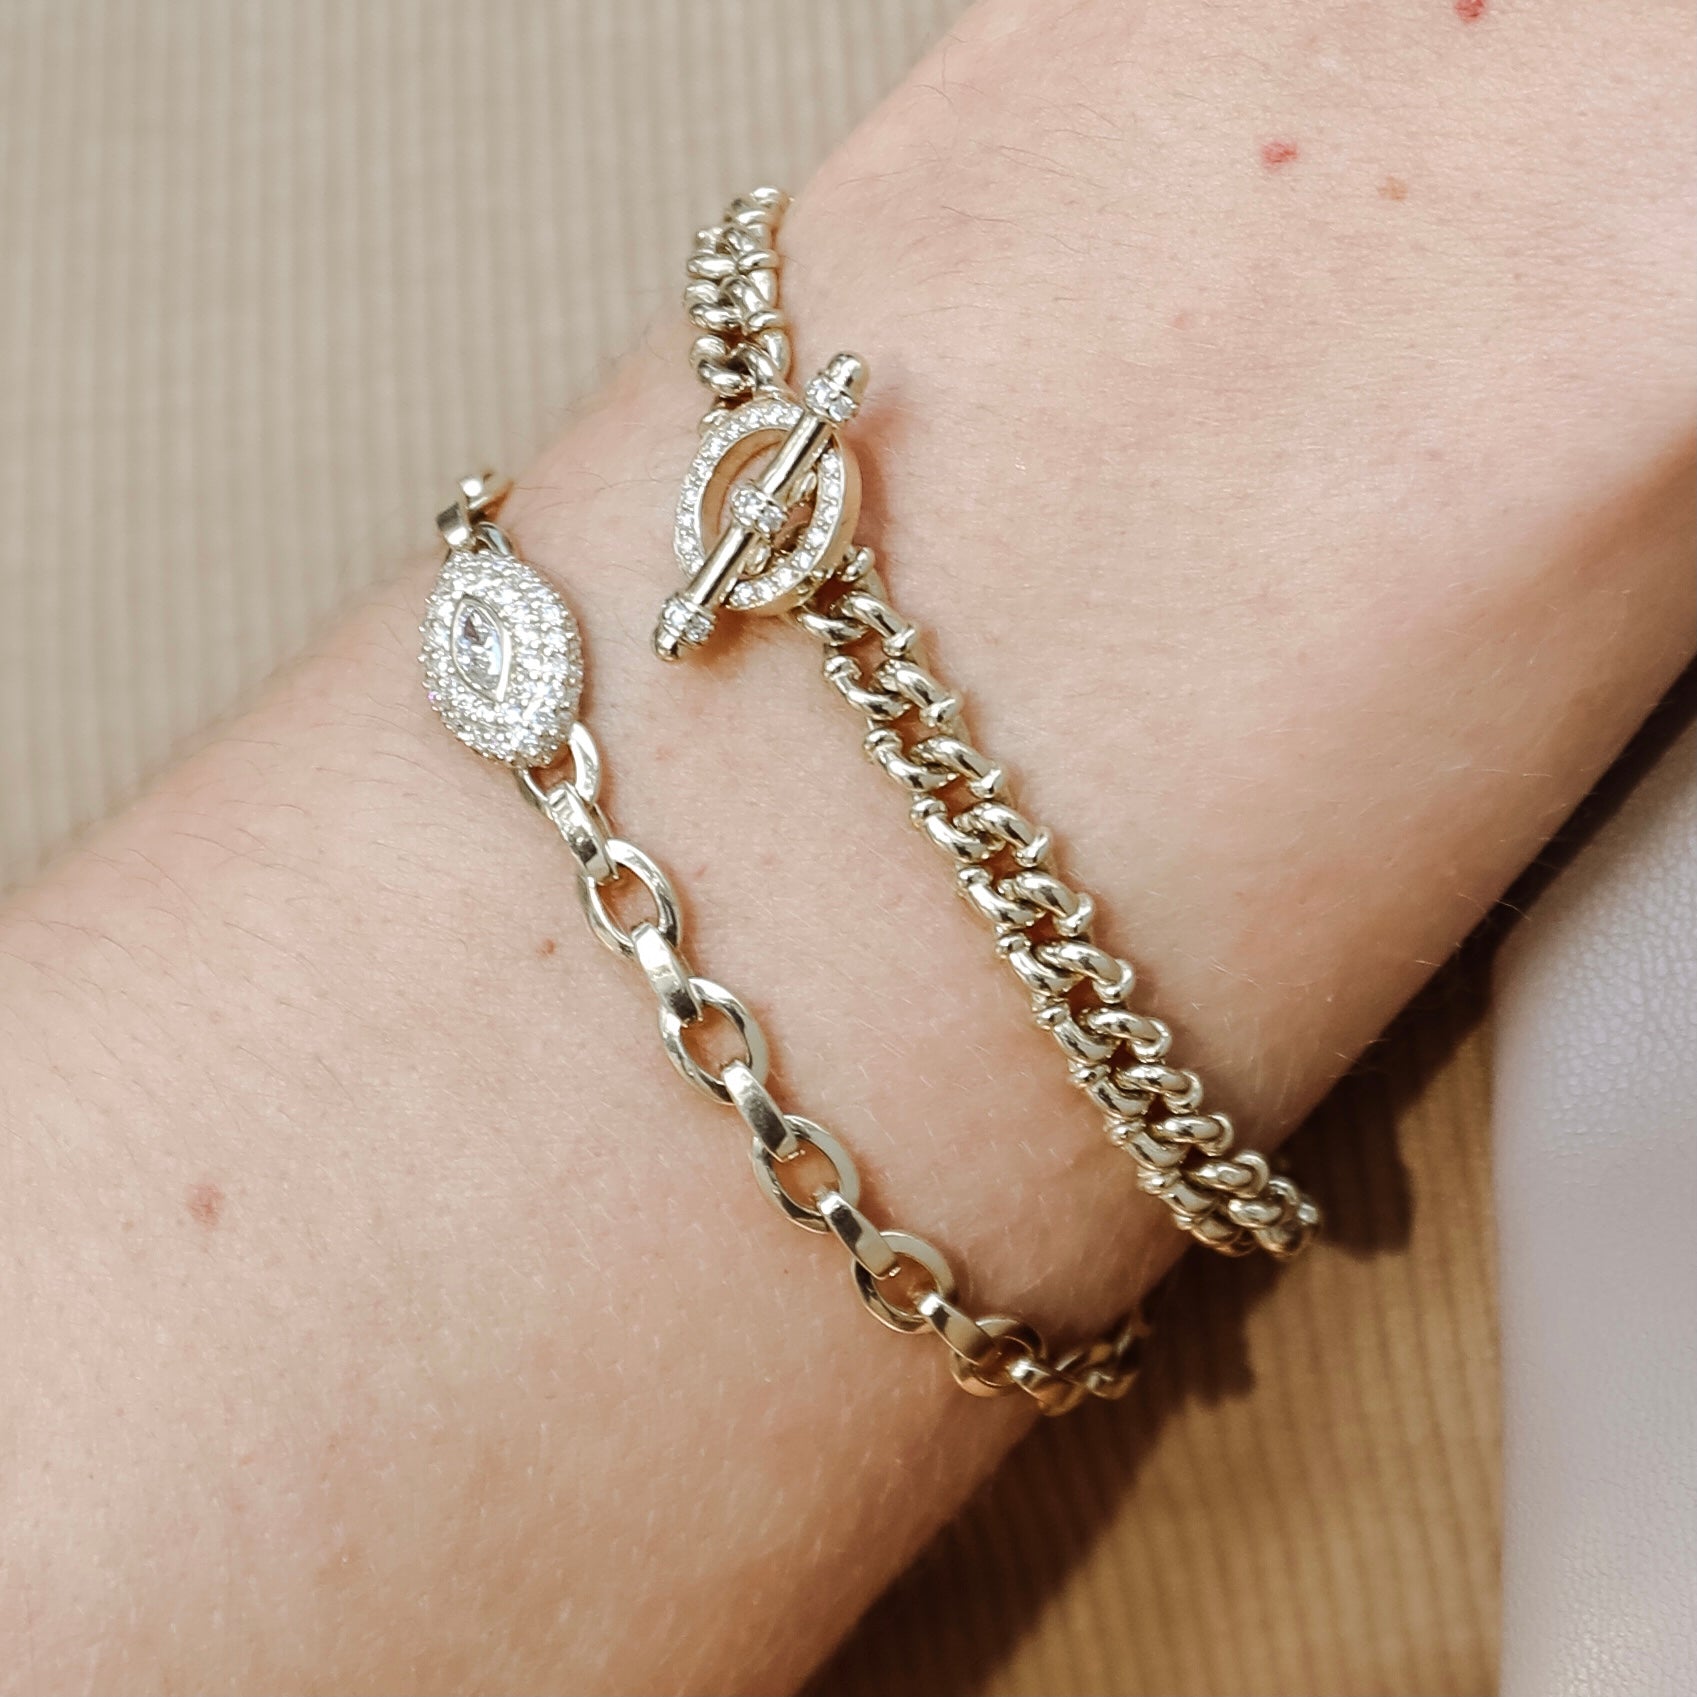 Linked Bracelet shown with the Marquise Link Bracelet